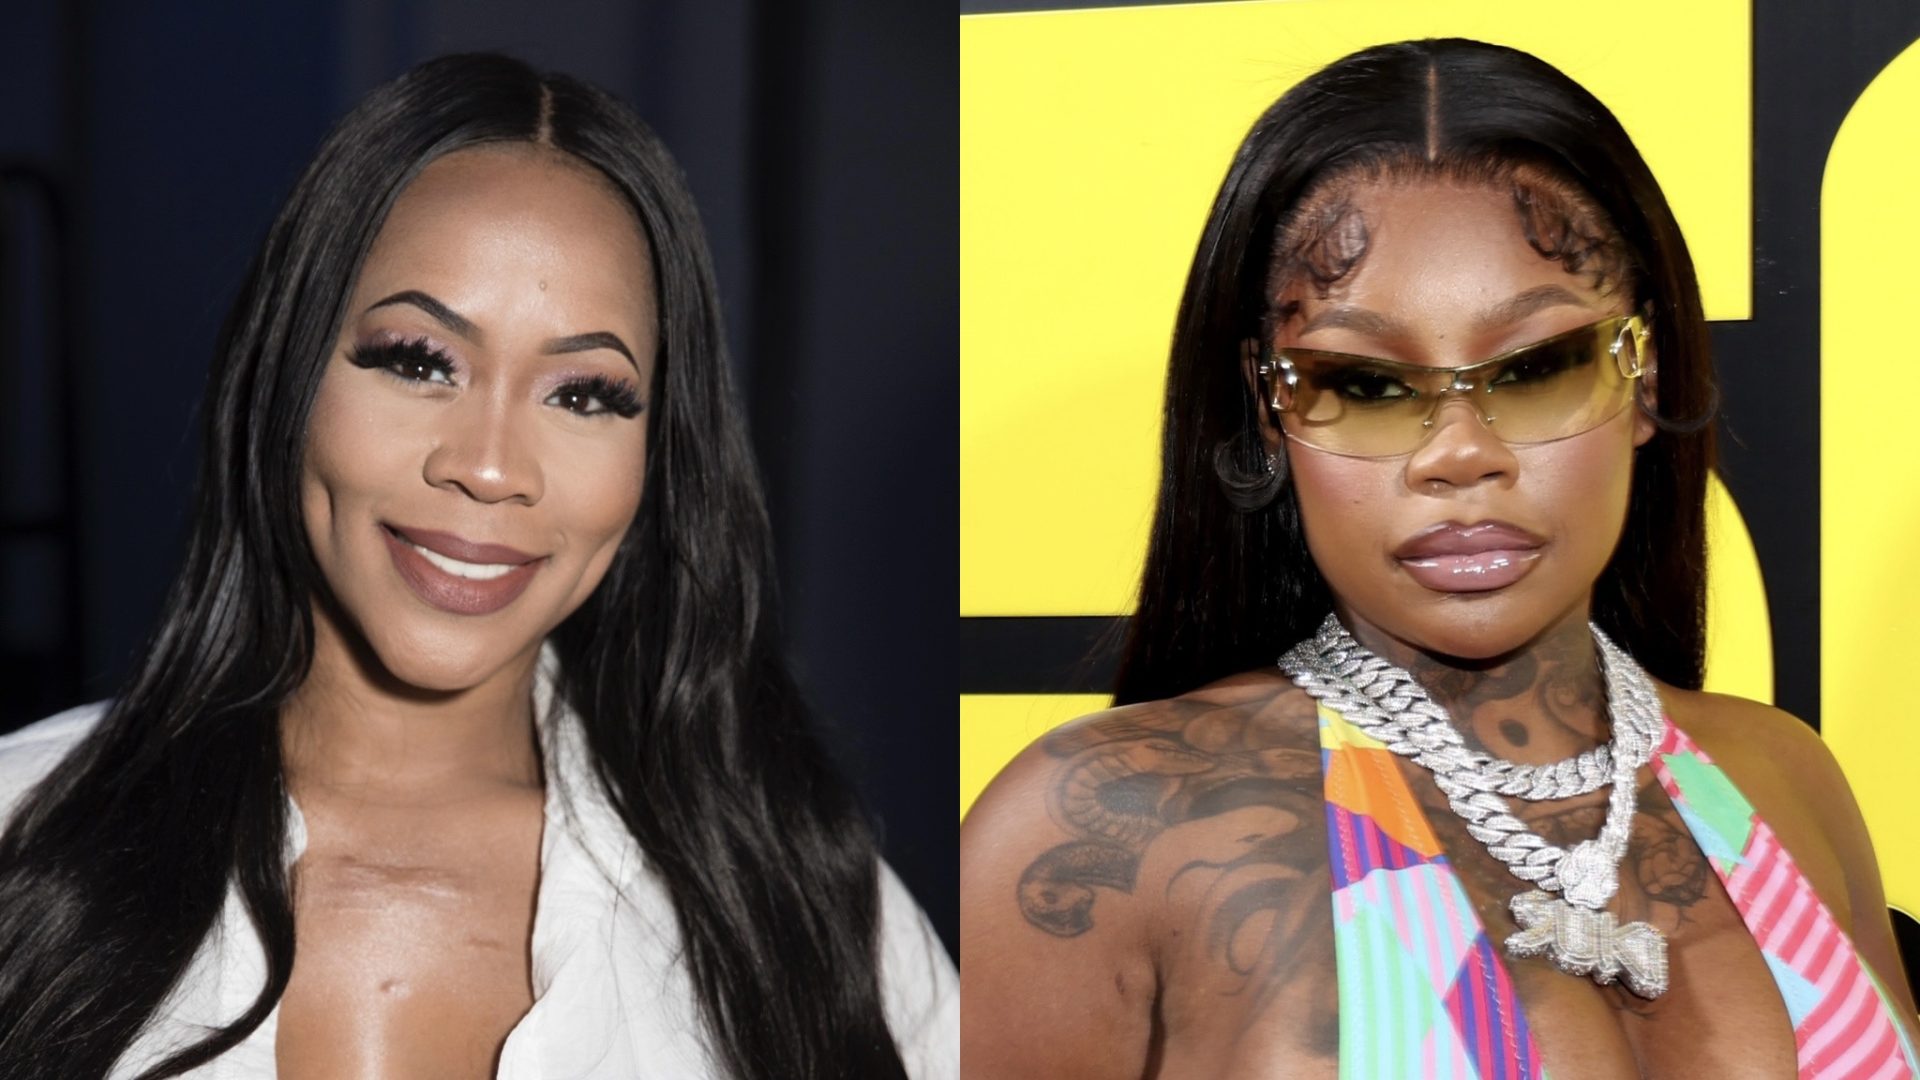 Deelishis Apologizes To Sukihana For Her Social Media Comment On The Rappers VMA Appearance scaled